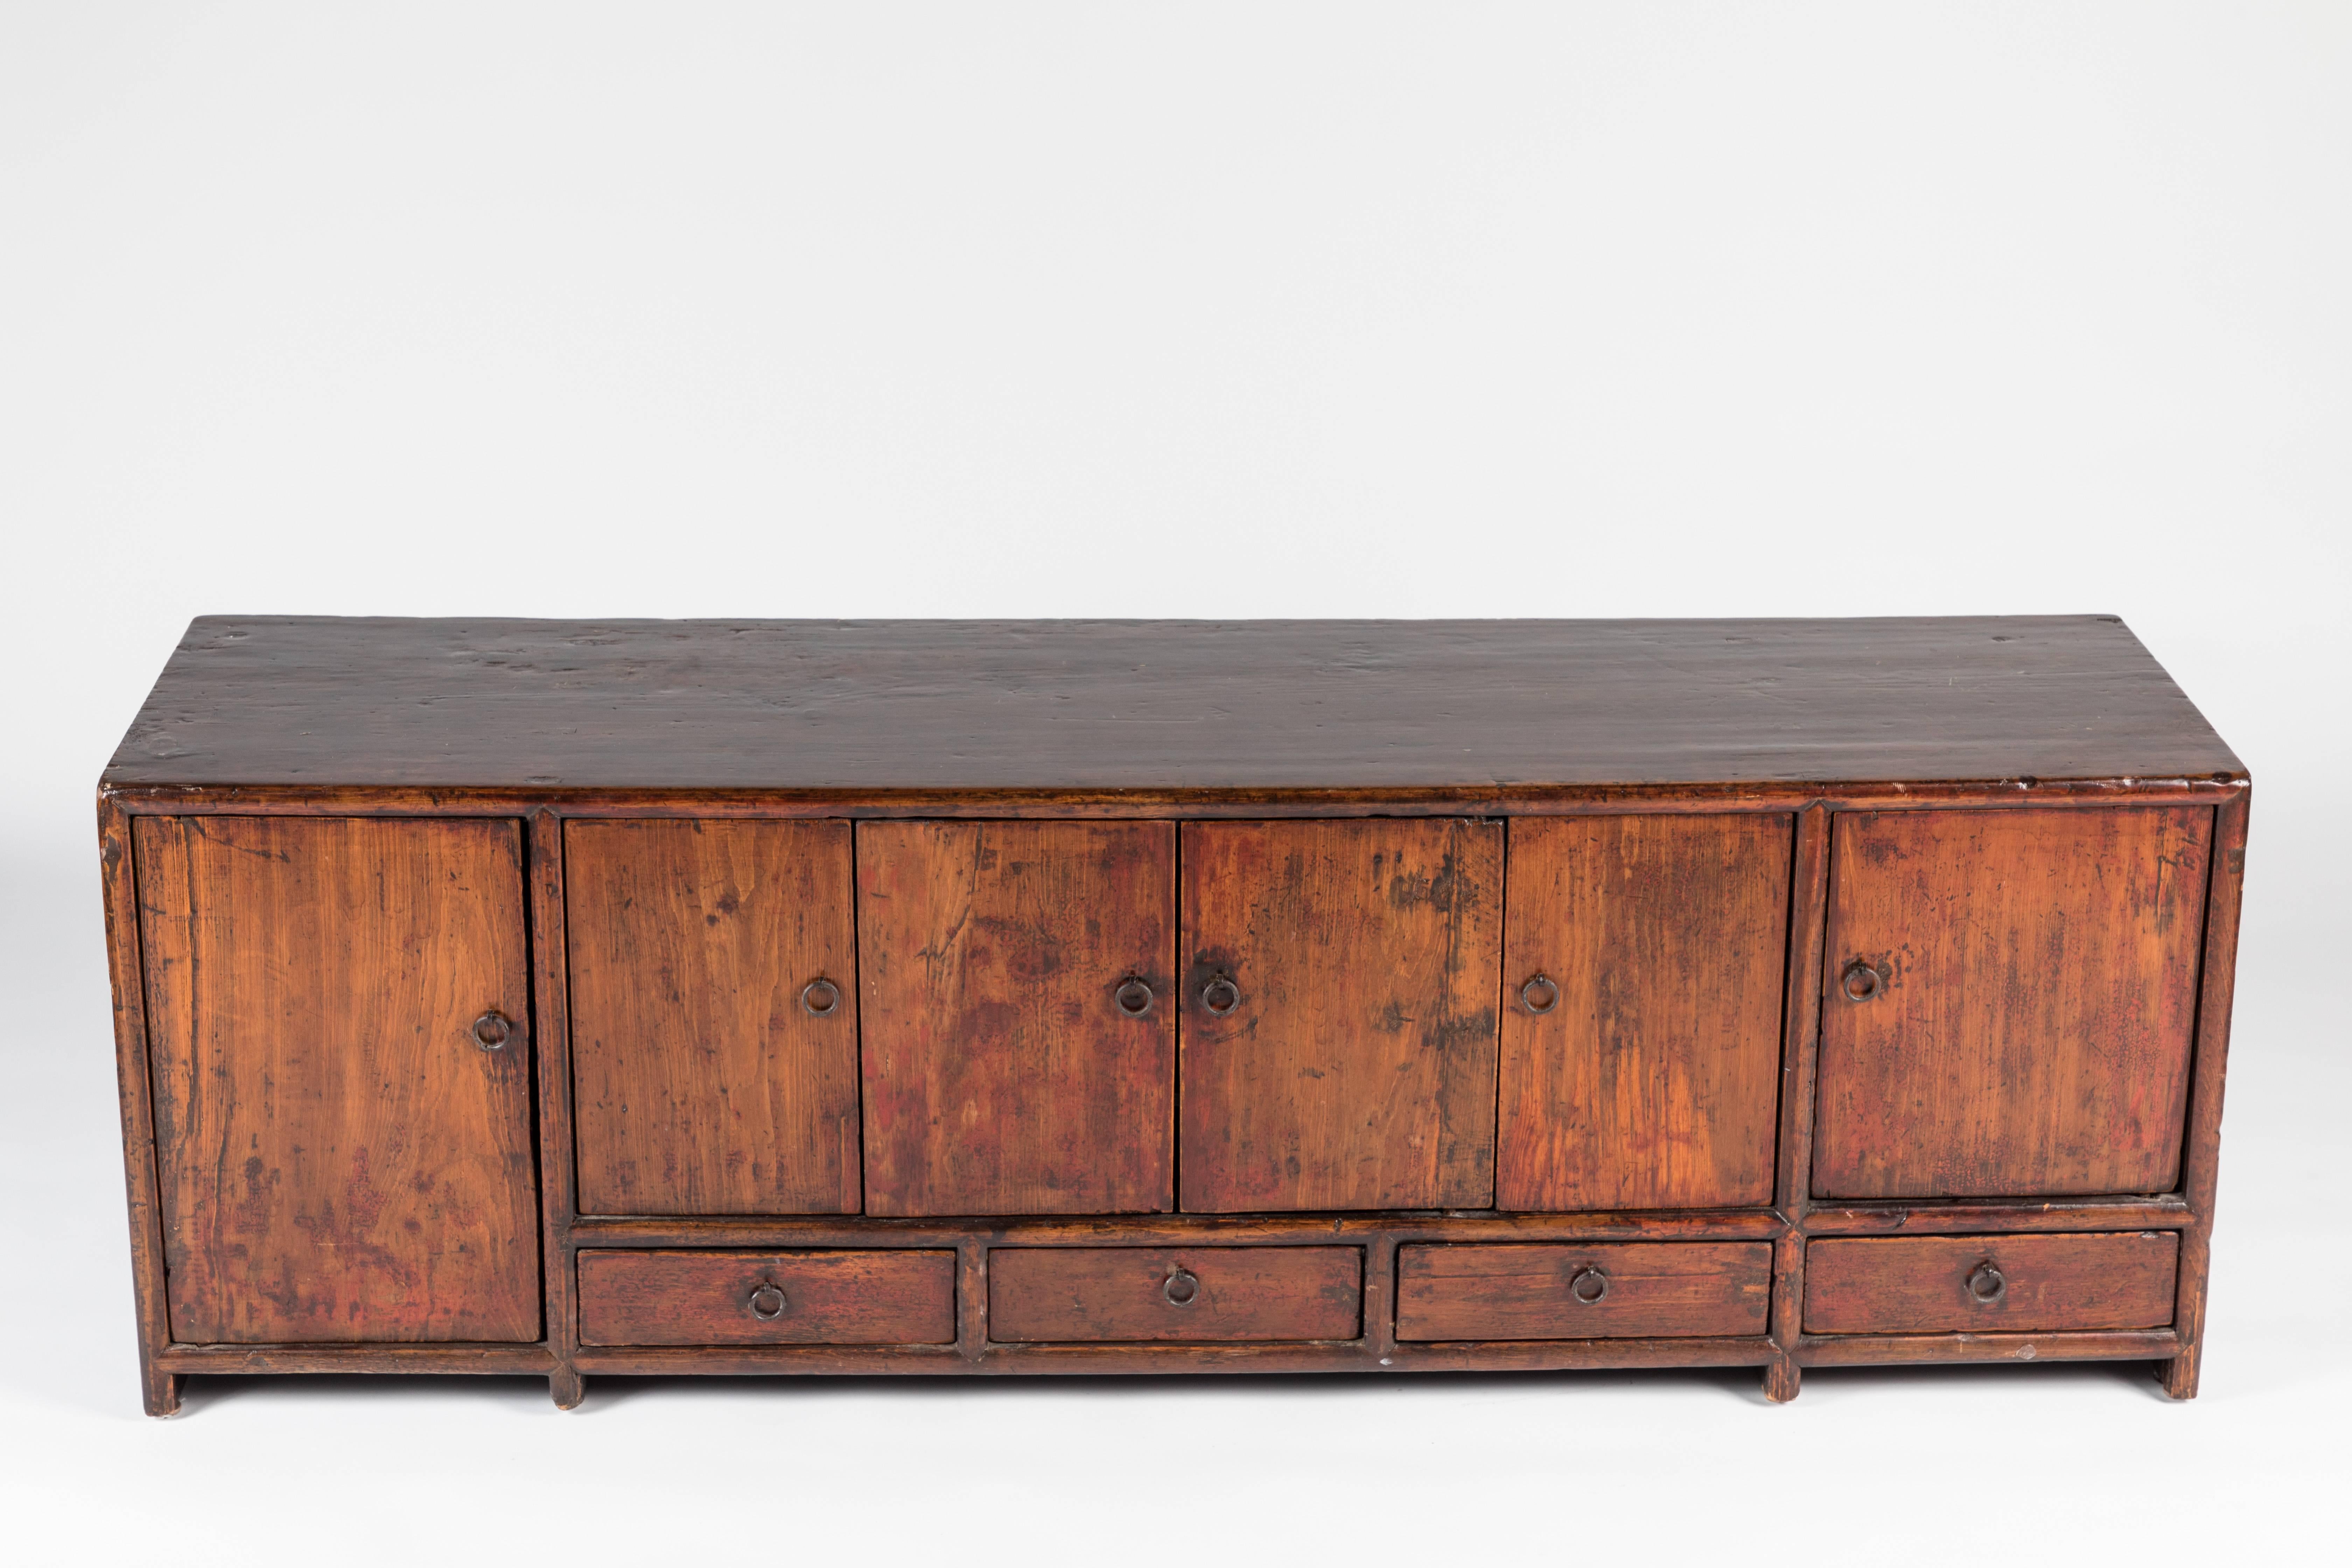 A unique sized antique Chinese wooden low console produced circa mid-late 19th century, which includes six doors, above four drawers, with pulls in brass. Good antique condition, with some wear as well as age appropriate patina to brass hardware.